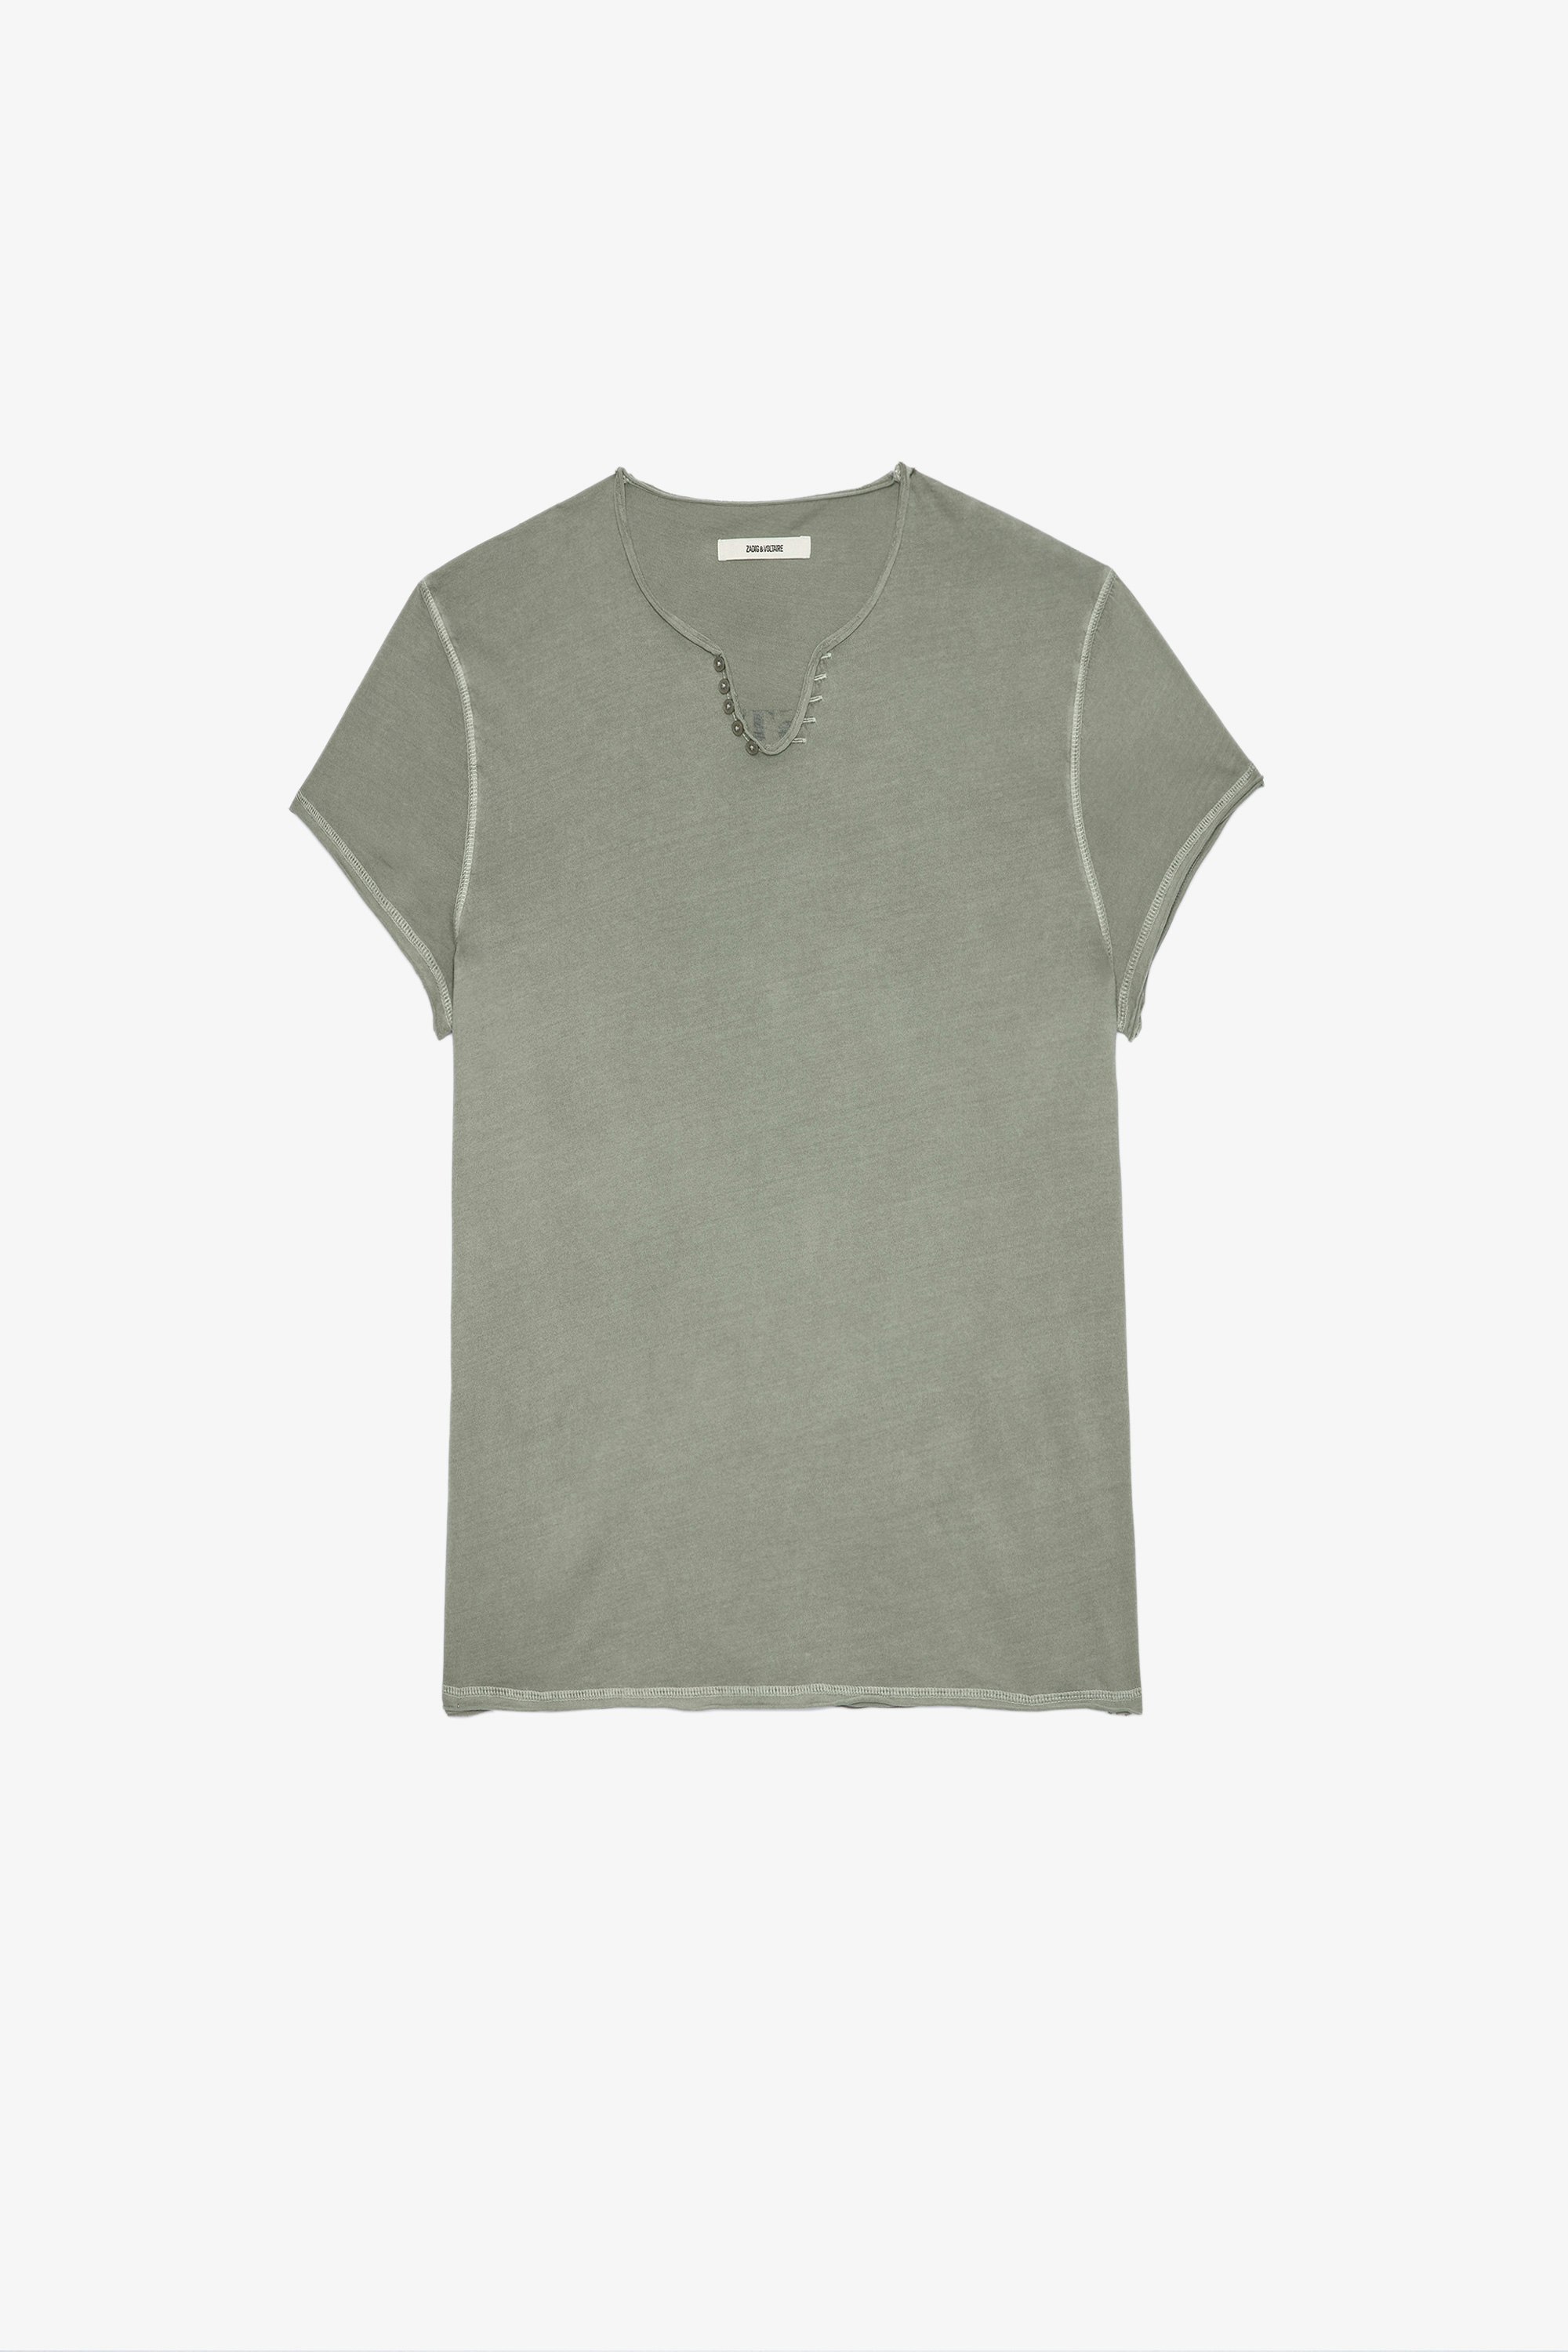 Monastir T-Shirt Men's short-sleeve T-shirt in green cotton and with Henley neckline and a slogan on the back